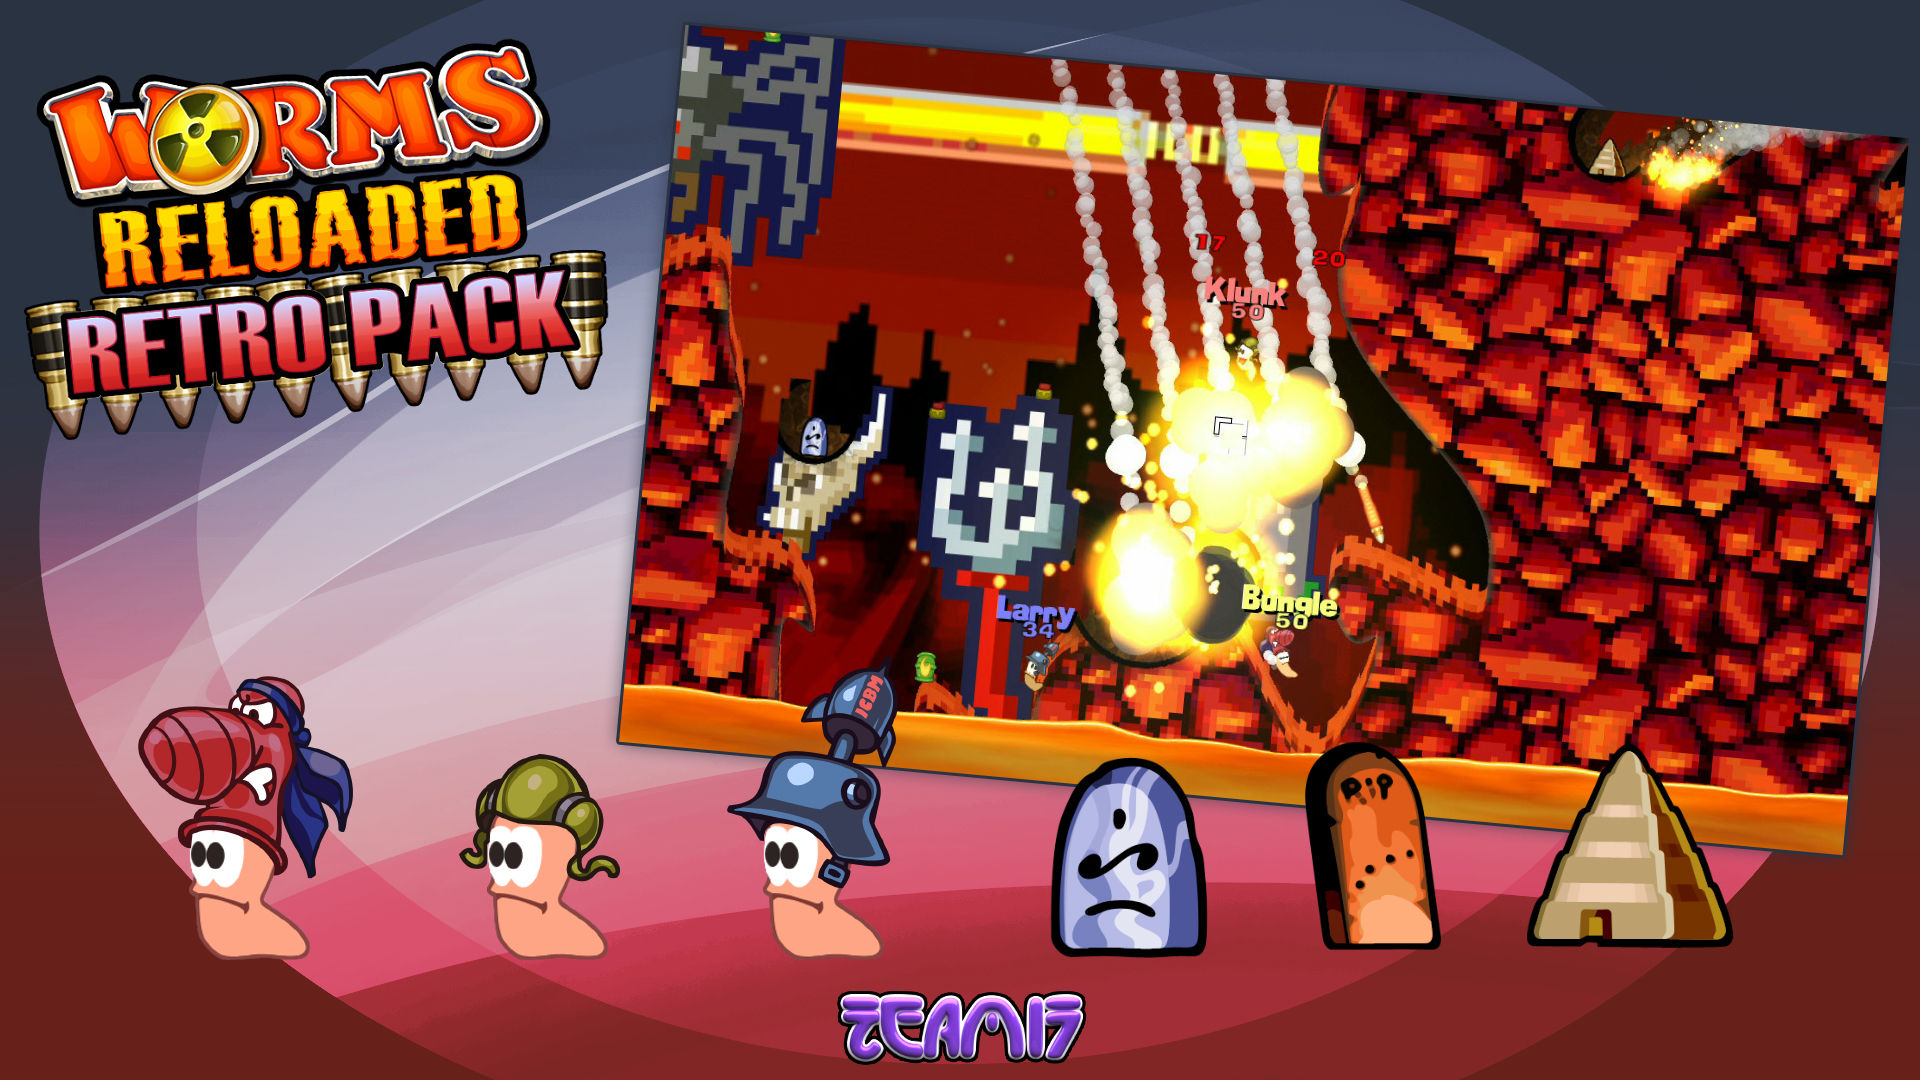 Worms Reloaded: Retro Pack Featured Screenshot #1